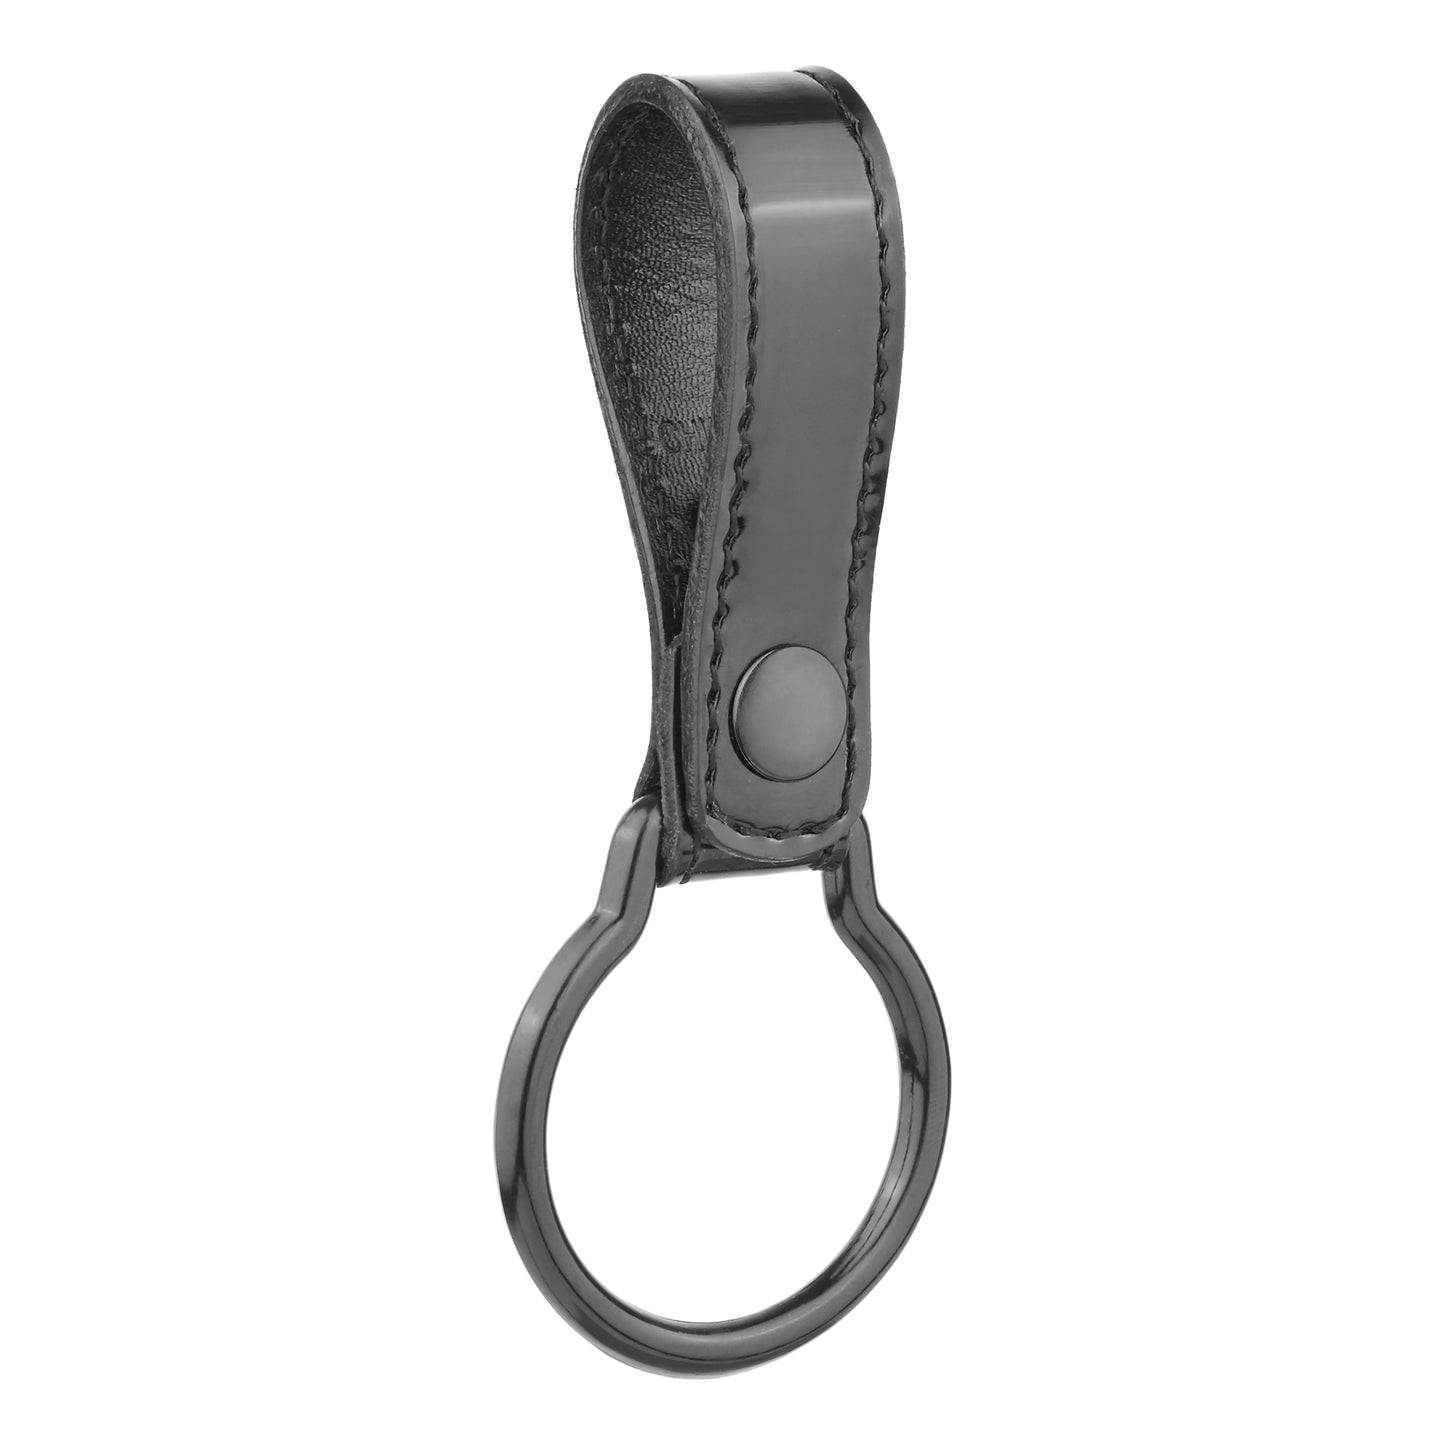 Clarino Leather D Cell Flashlight Strap